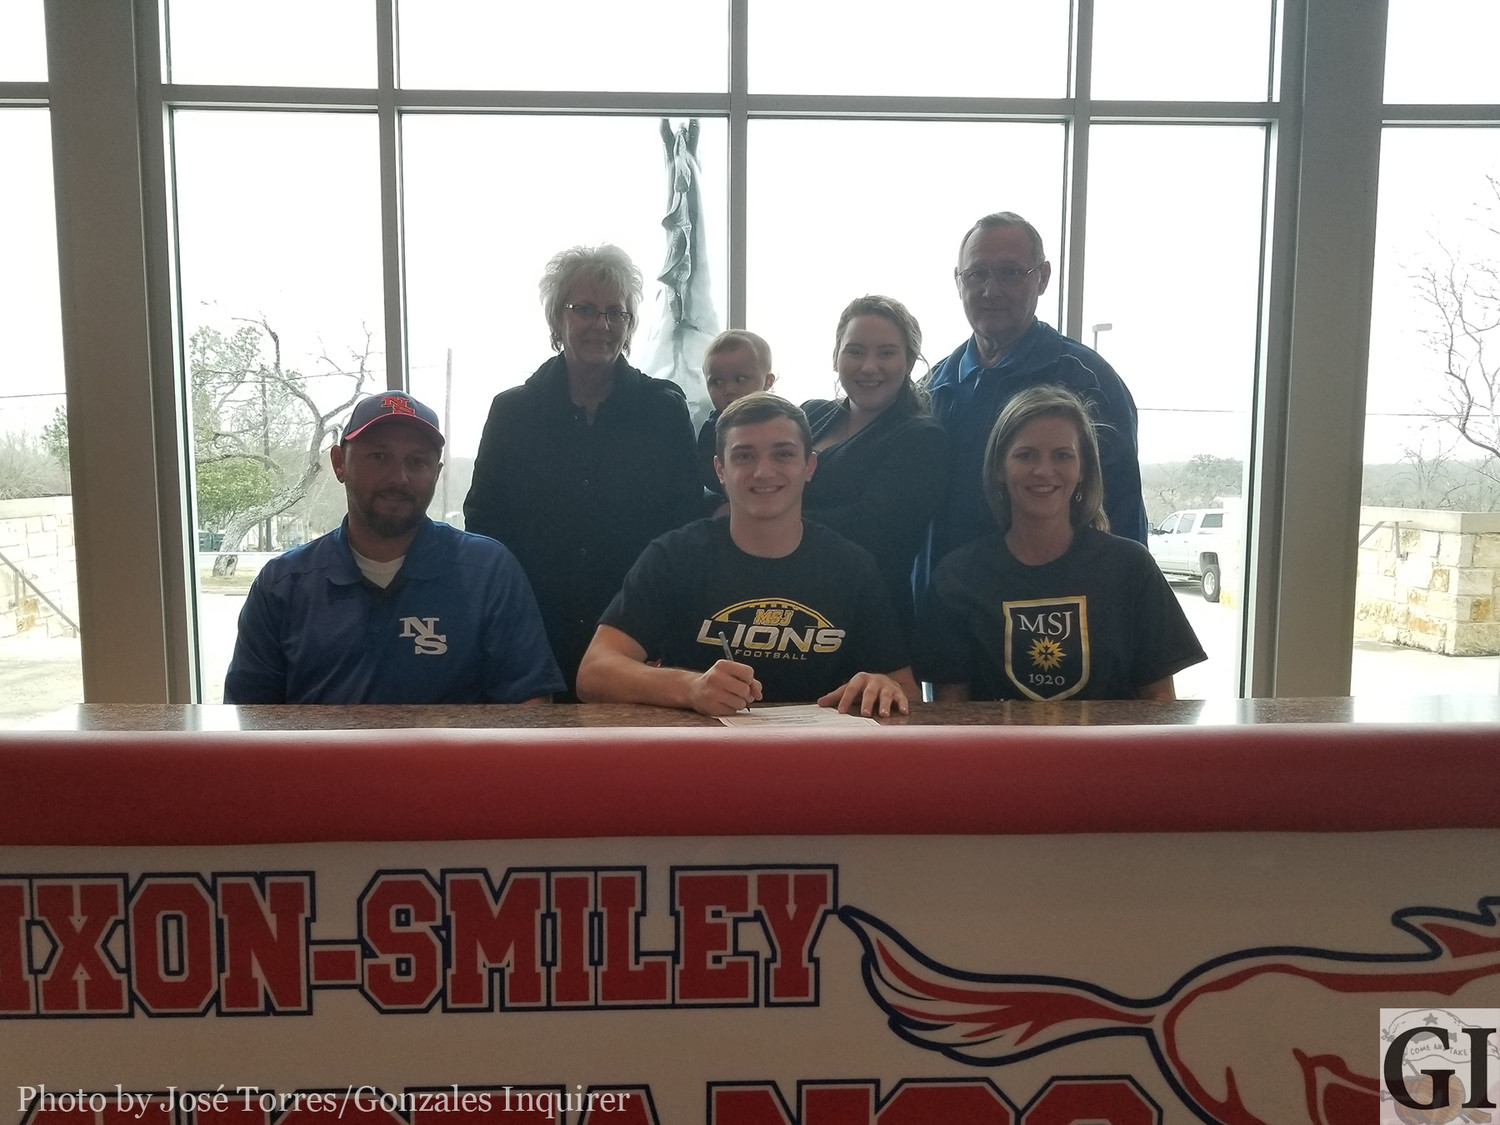 Colby Newman signed on National Signing Day, Feb. 7, to play for the Mount St. Joseph University Lions near Cincinnati, Ohio.